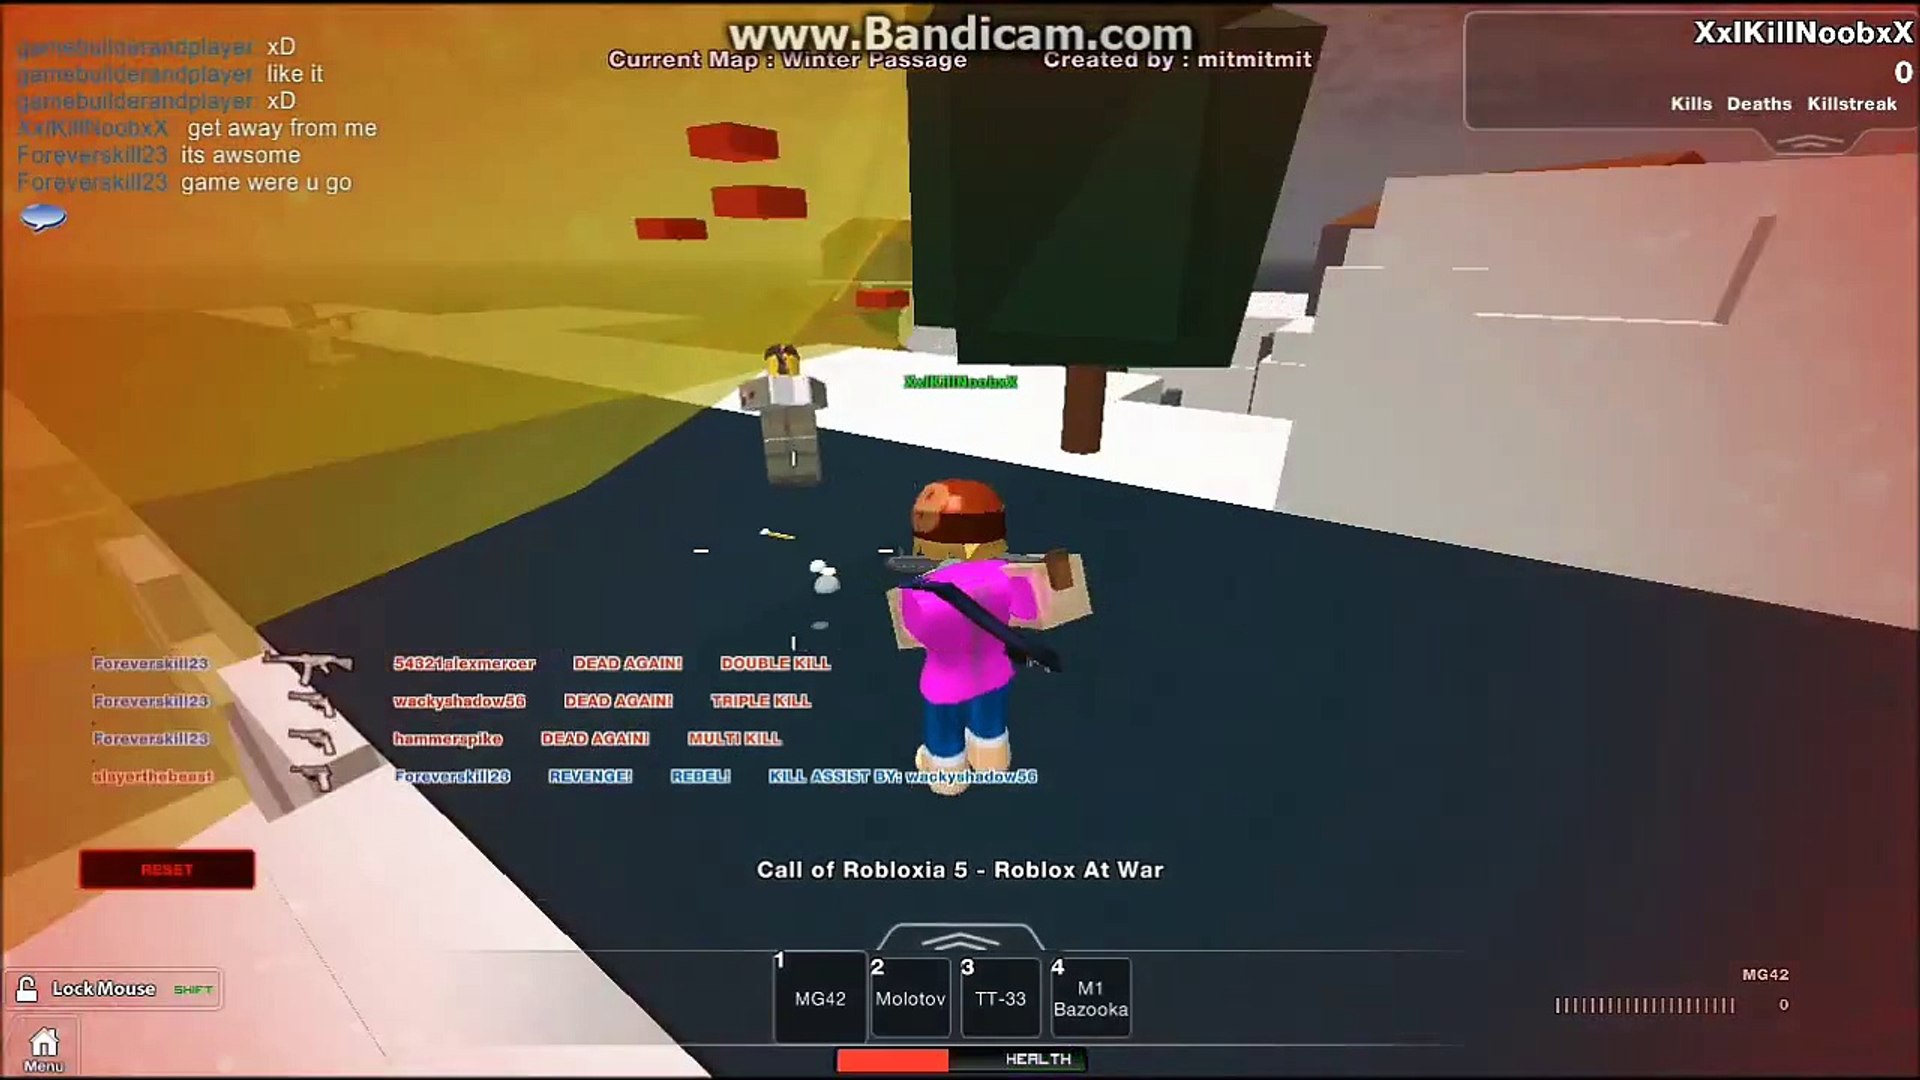 Roblox Call Of Robloxia 5 Roblox At War 2013 Hacks Video Dailymotion - hacks for roblox dead locked